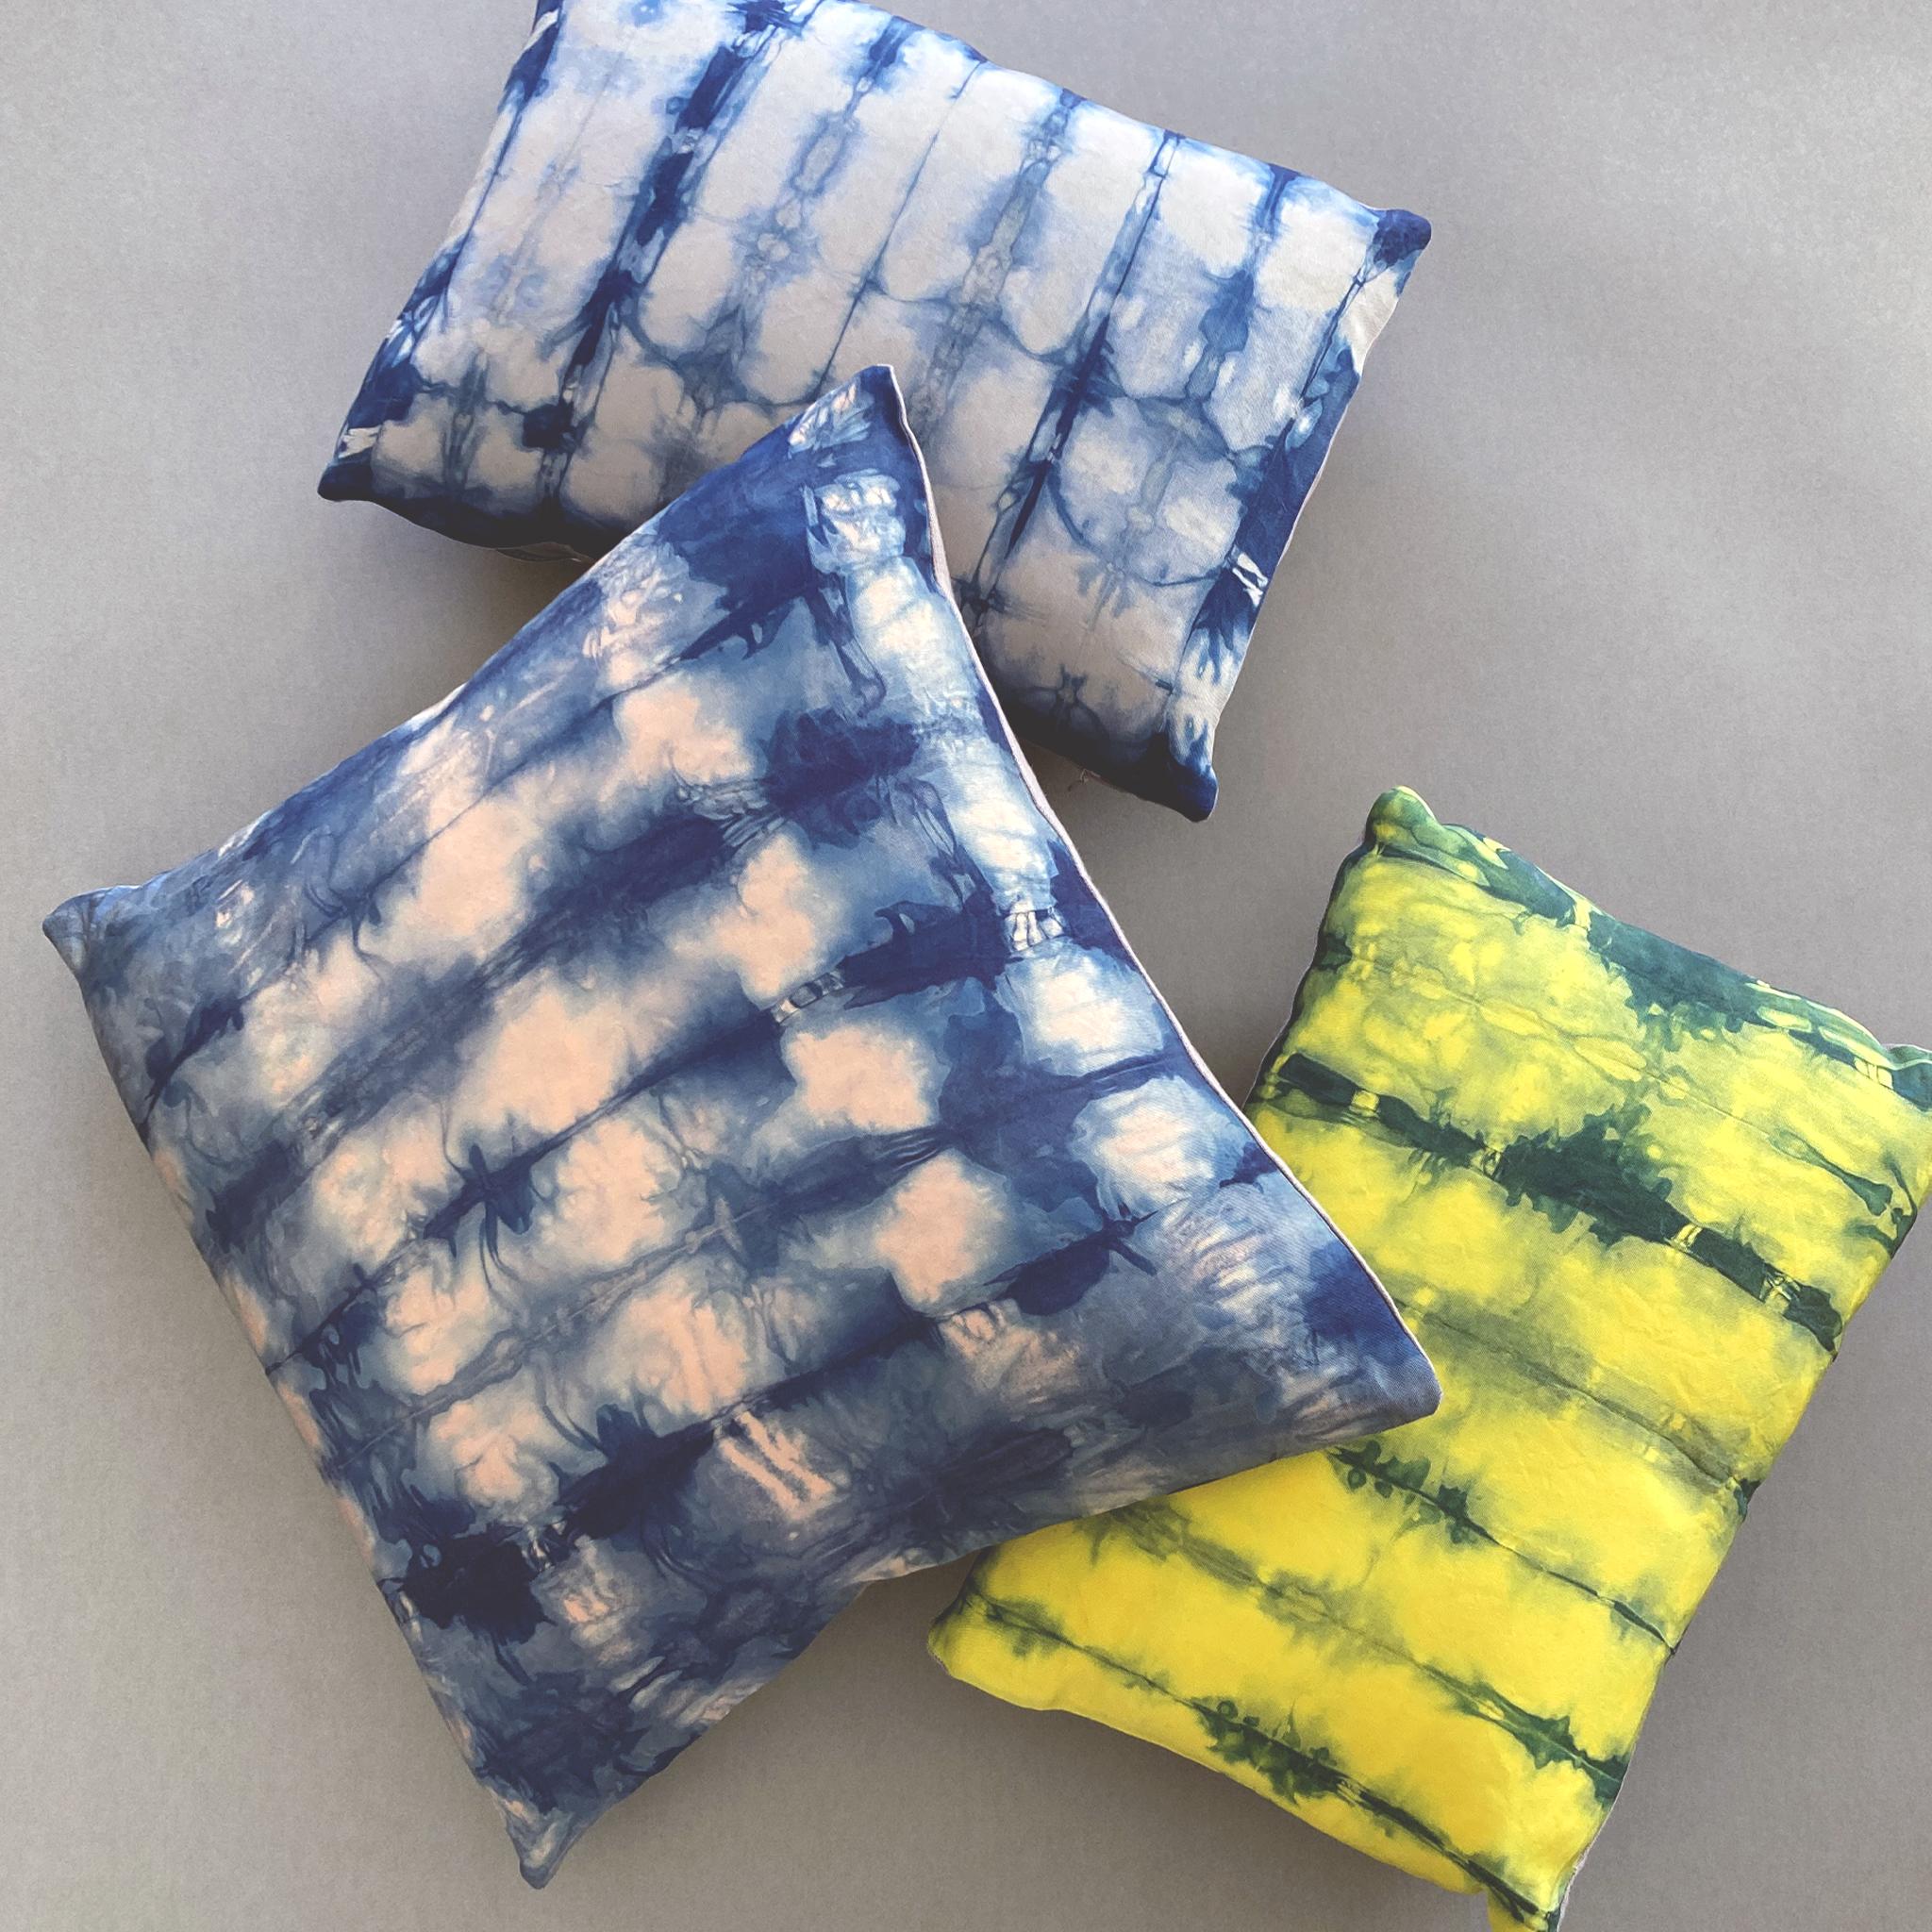 Canary yellow silk faille pillow dyed with indigo in Ripple pattern with gray linen backing. Hand-dyed and sewn in New York City, down pillow insert made locally in NYC. Pillow measures 12 x 16 inches. Each silk pillow is hand made and one of a